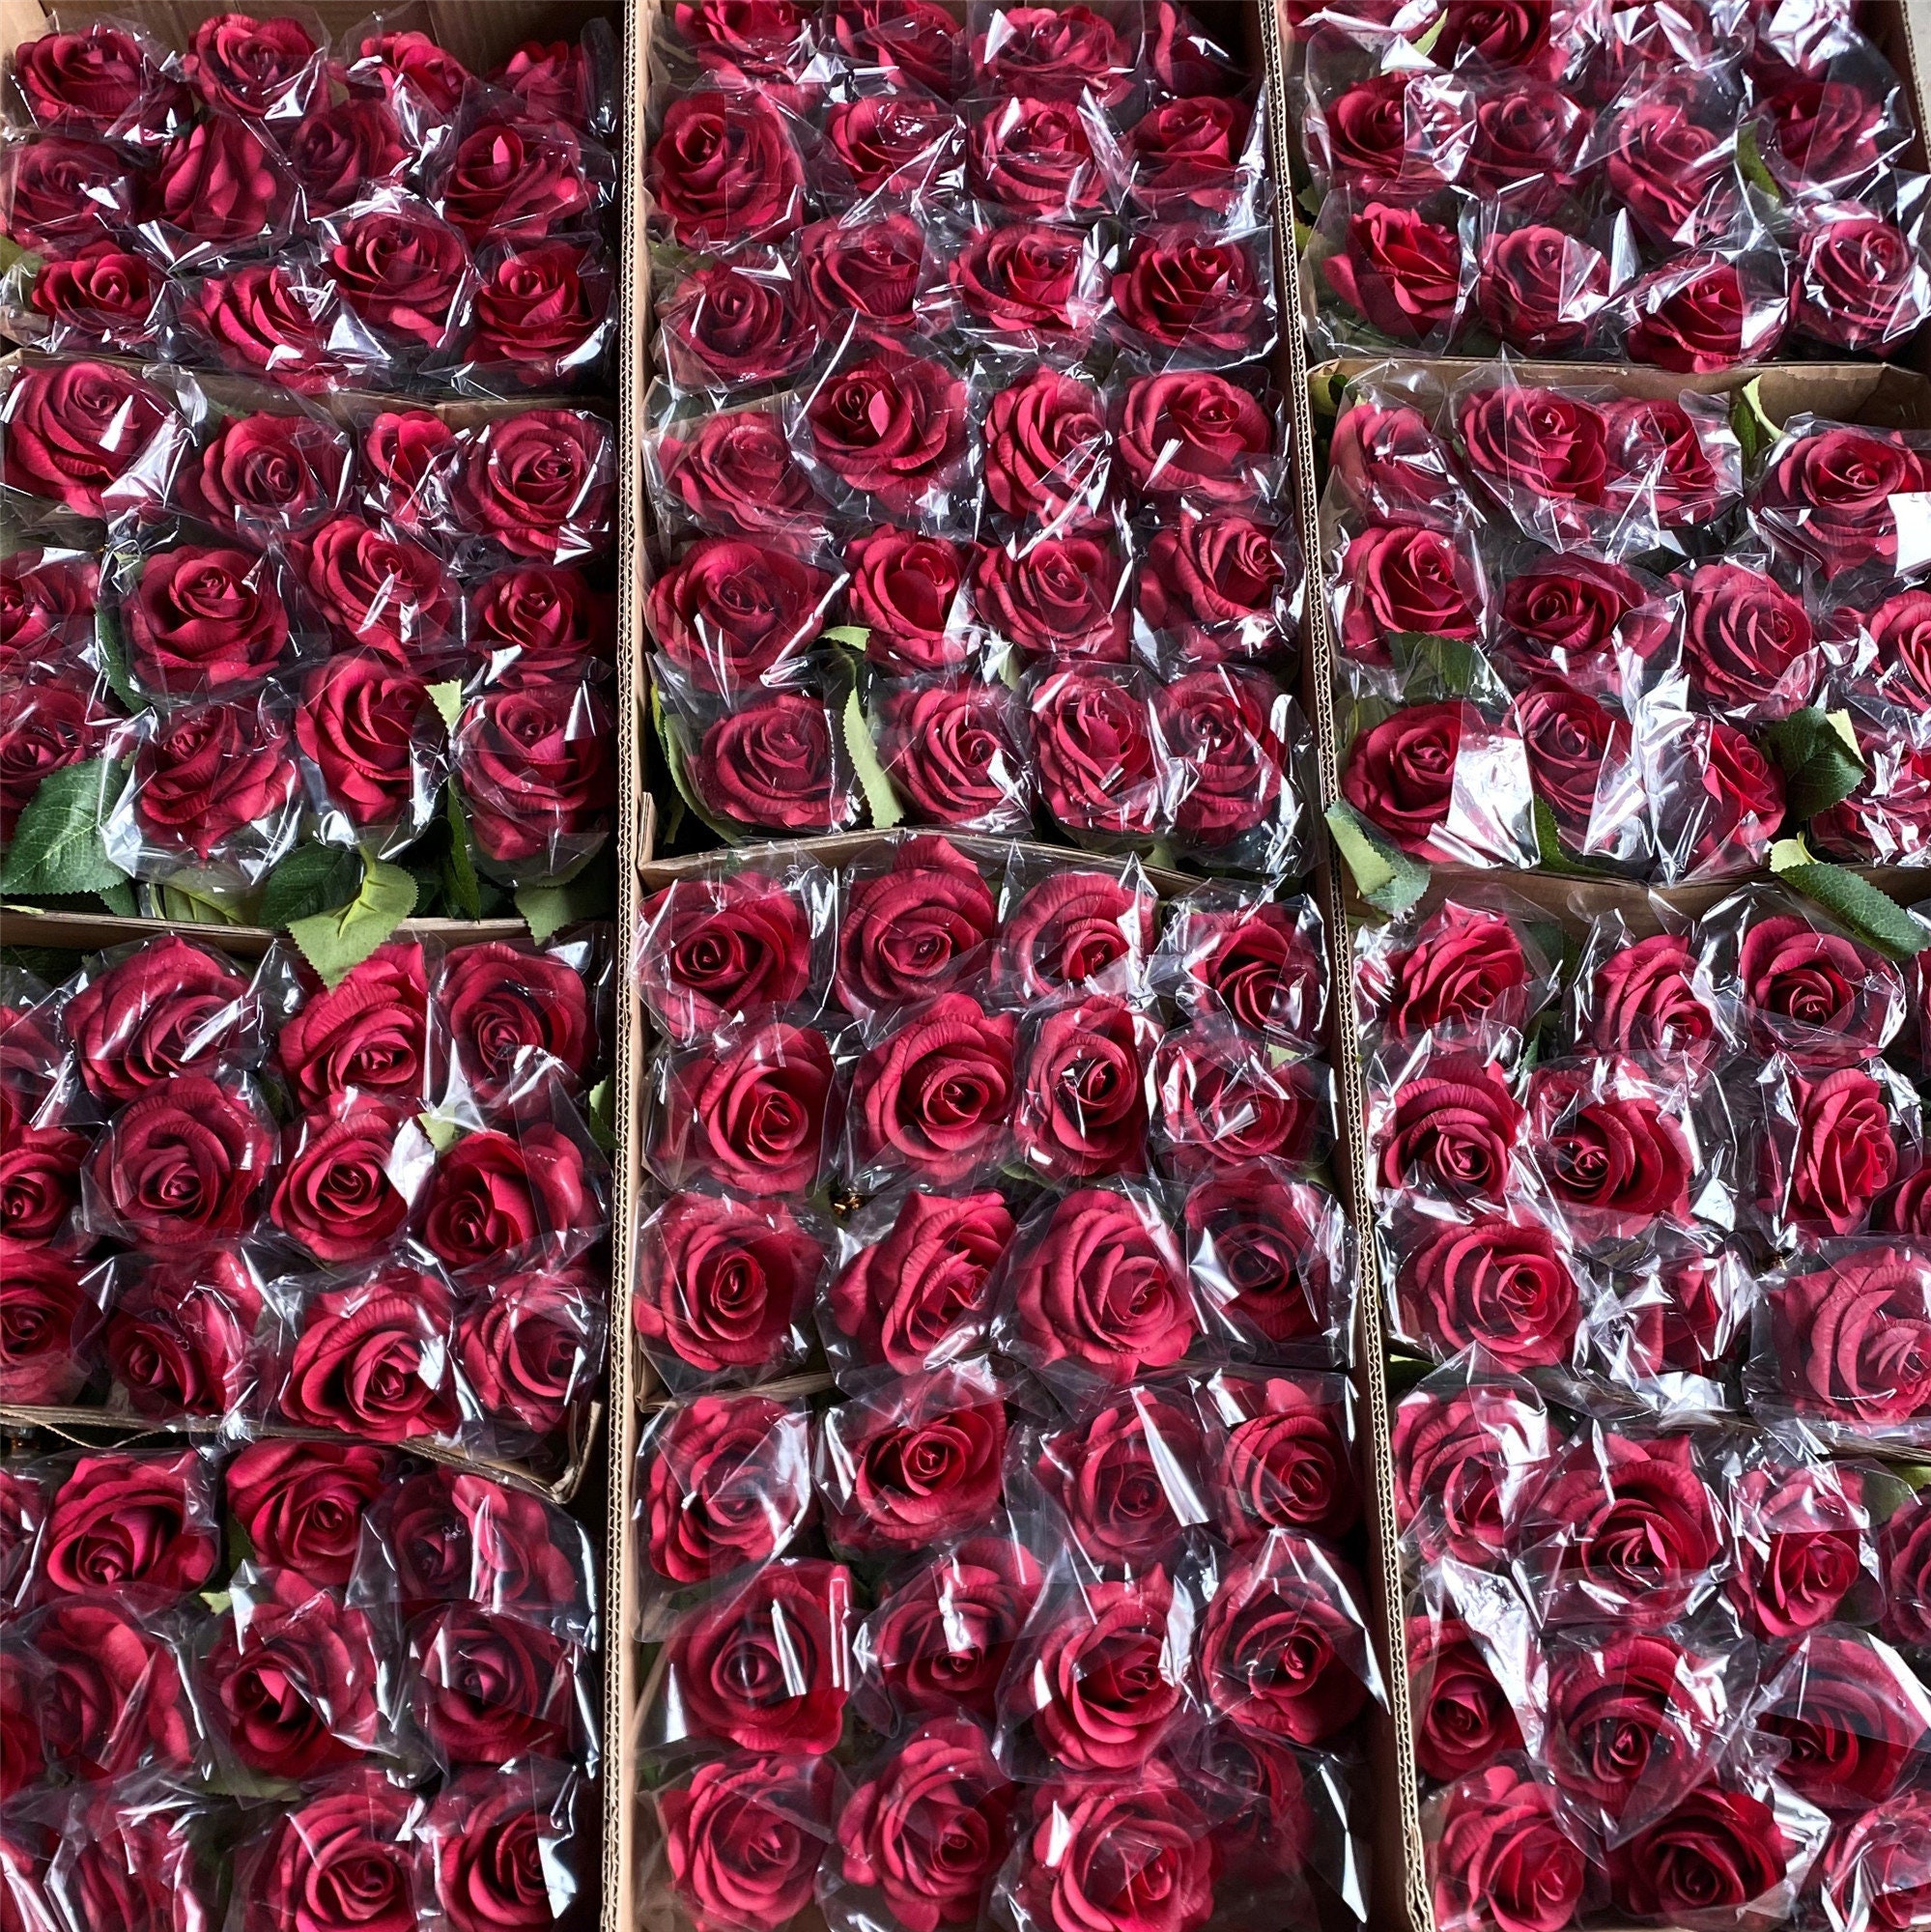 5pcs Deep Red Mini Roses, Dried Small Dark Red Roses, Wine Red Dried Roses  for Crafts, Mahogany Tone Rose 